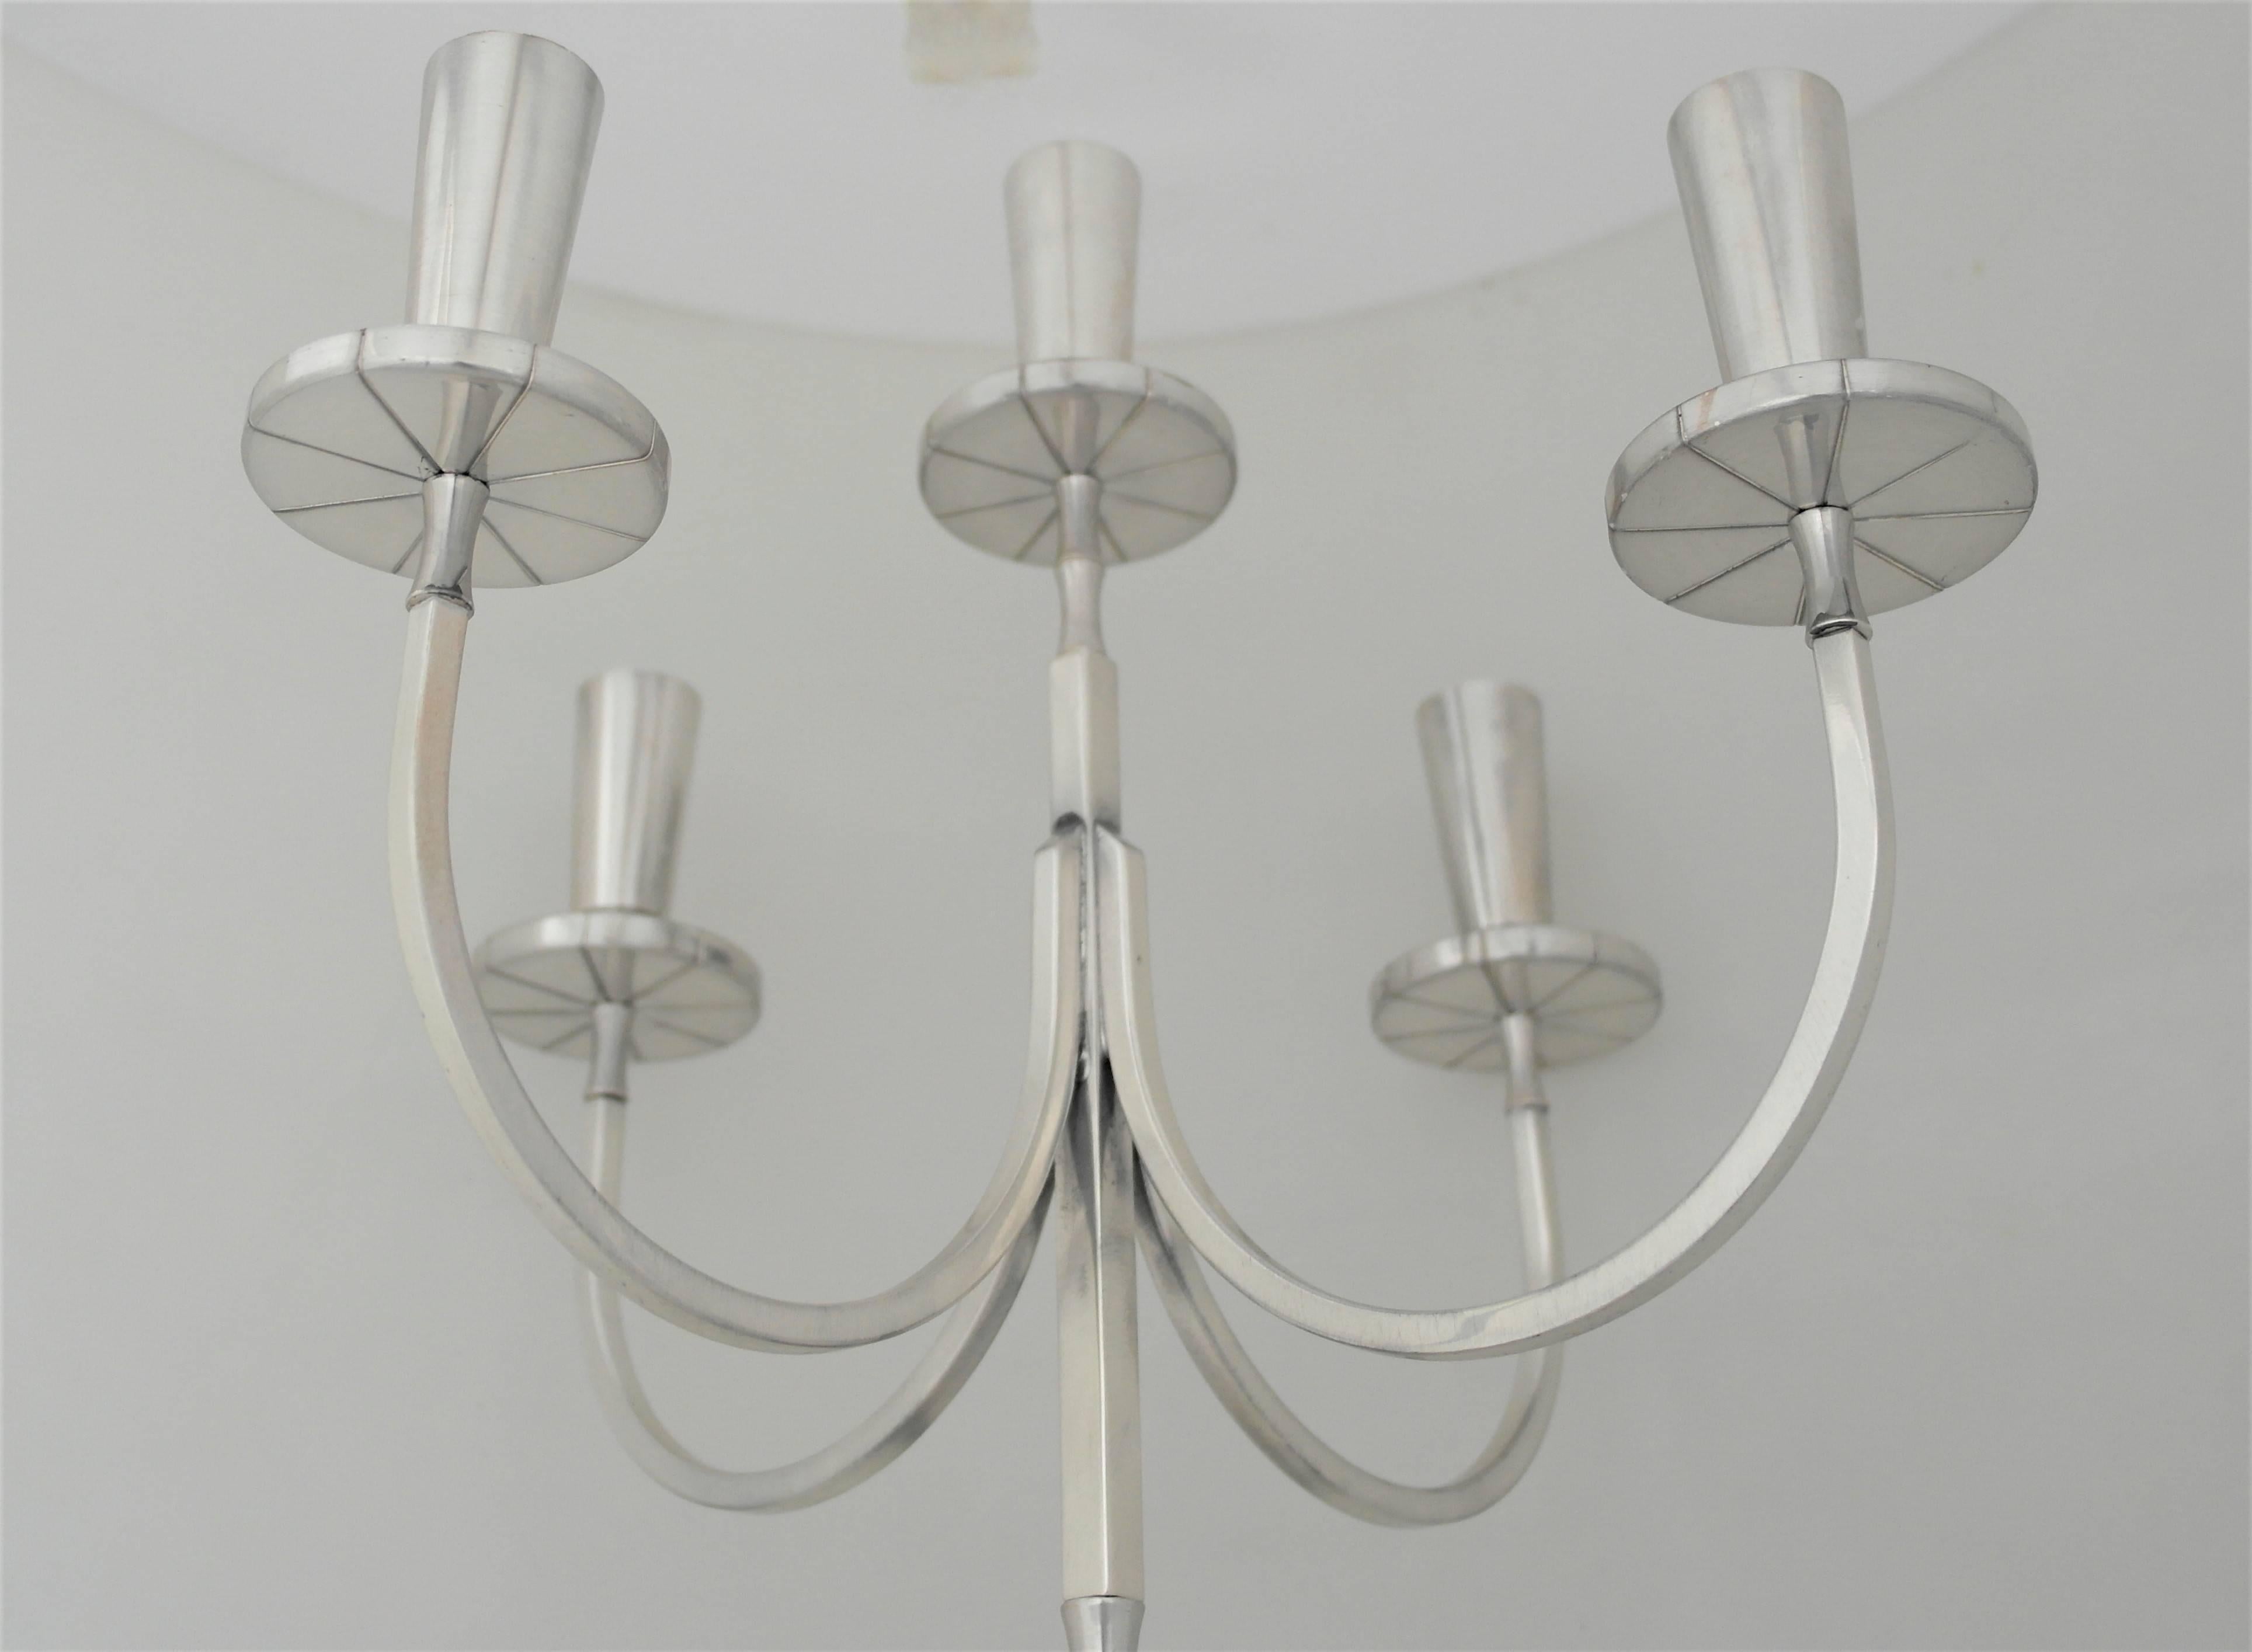 Rare 5 LIGHT Tommi Parzinger 1955 Modernist Silver Pair of Candelabra MODERNE  In Excellent Condition For Sale In New York, NY